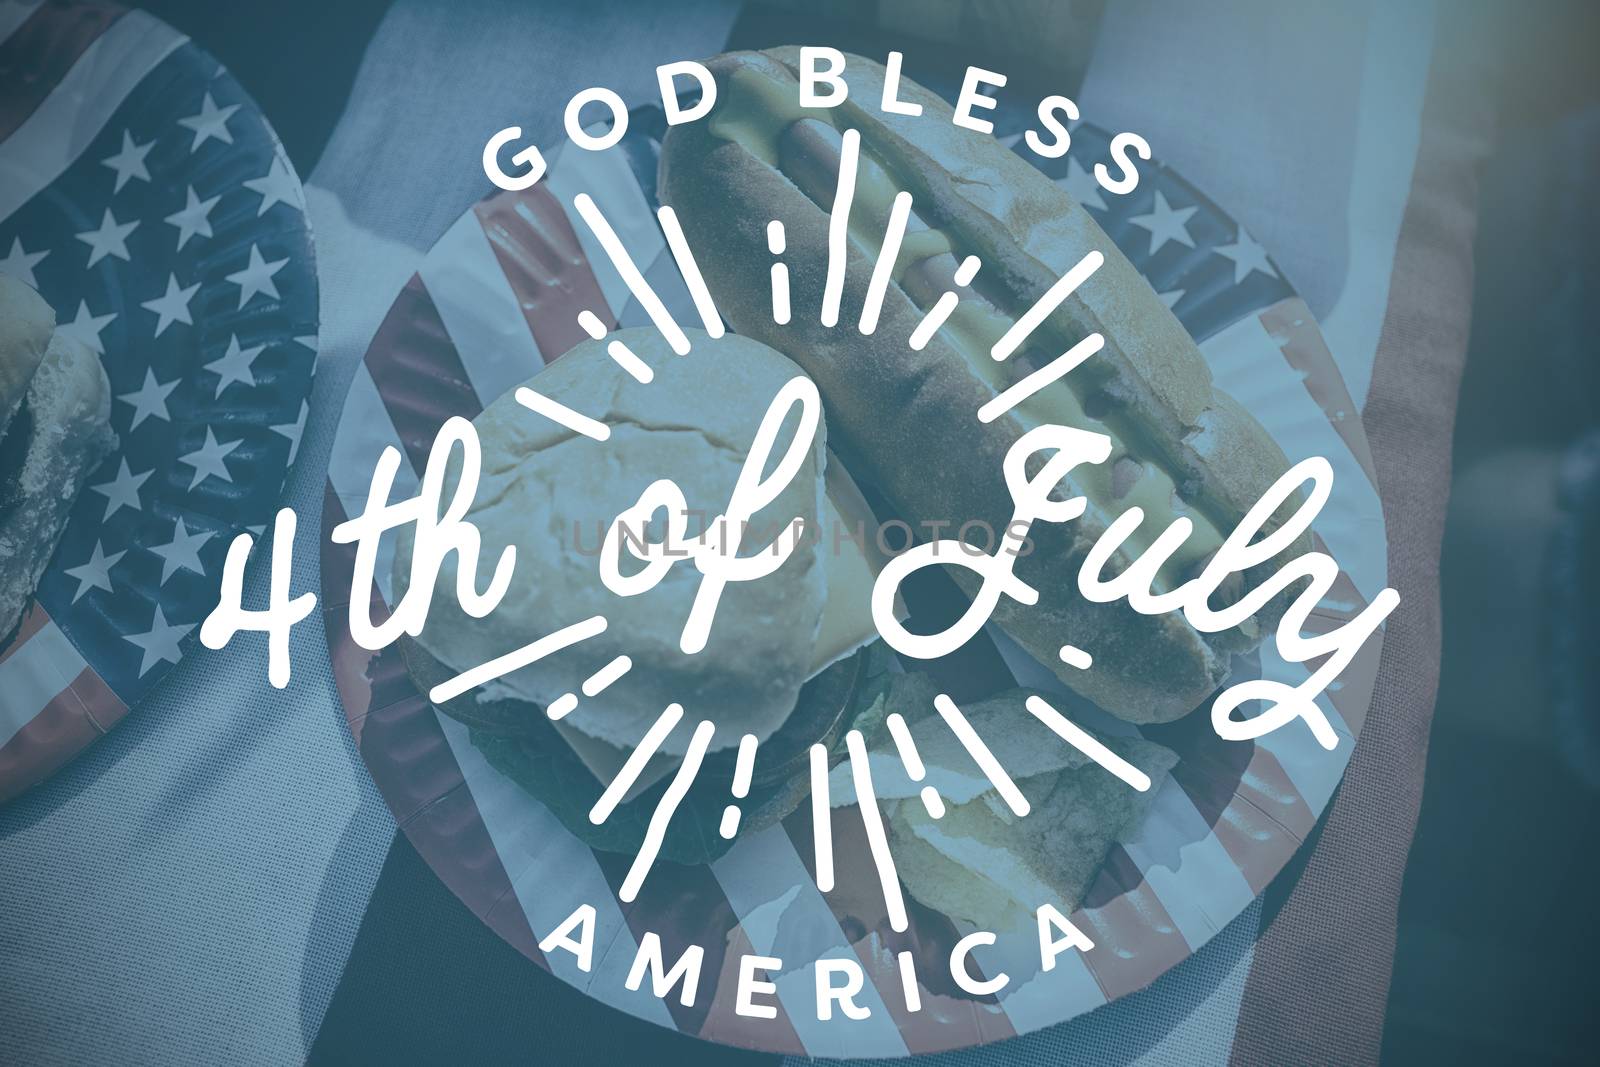 Composite image of digitally generated image of happy 4th of july message by Wavebreakmedia